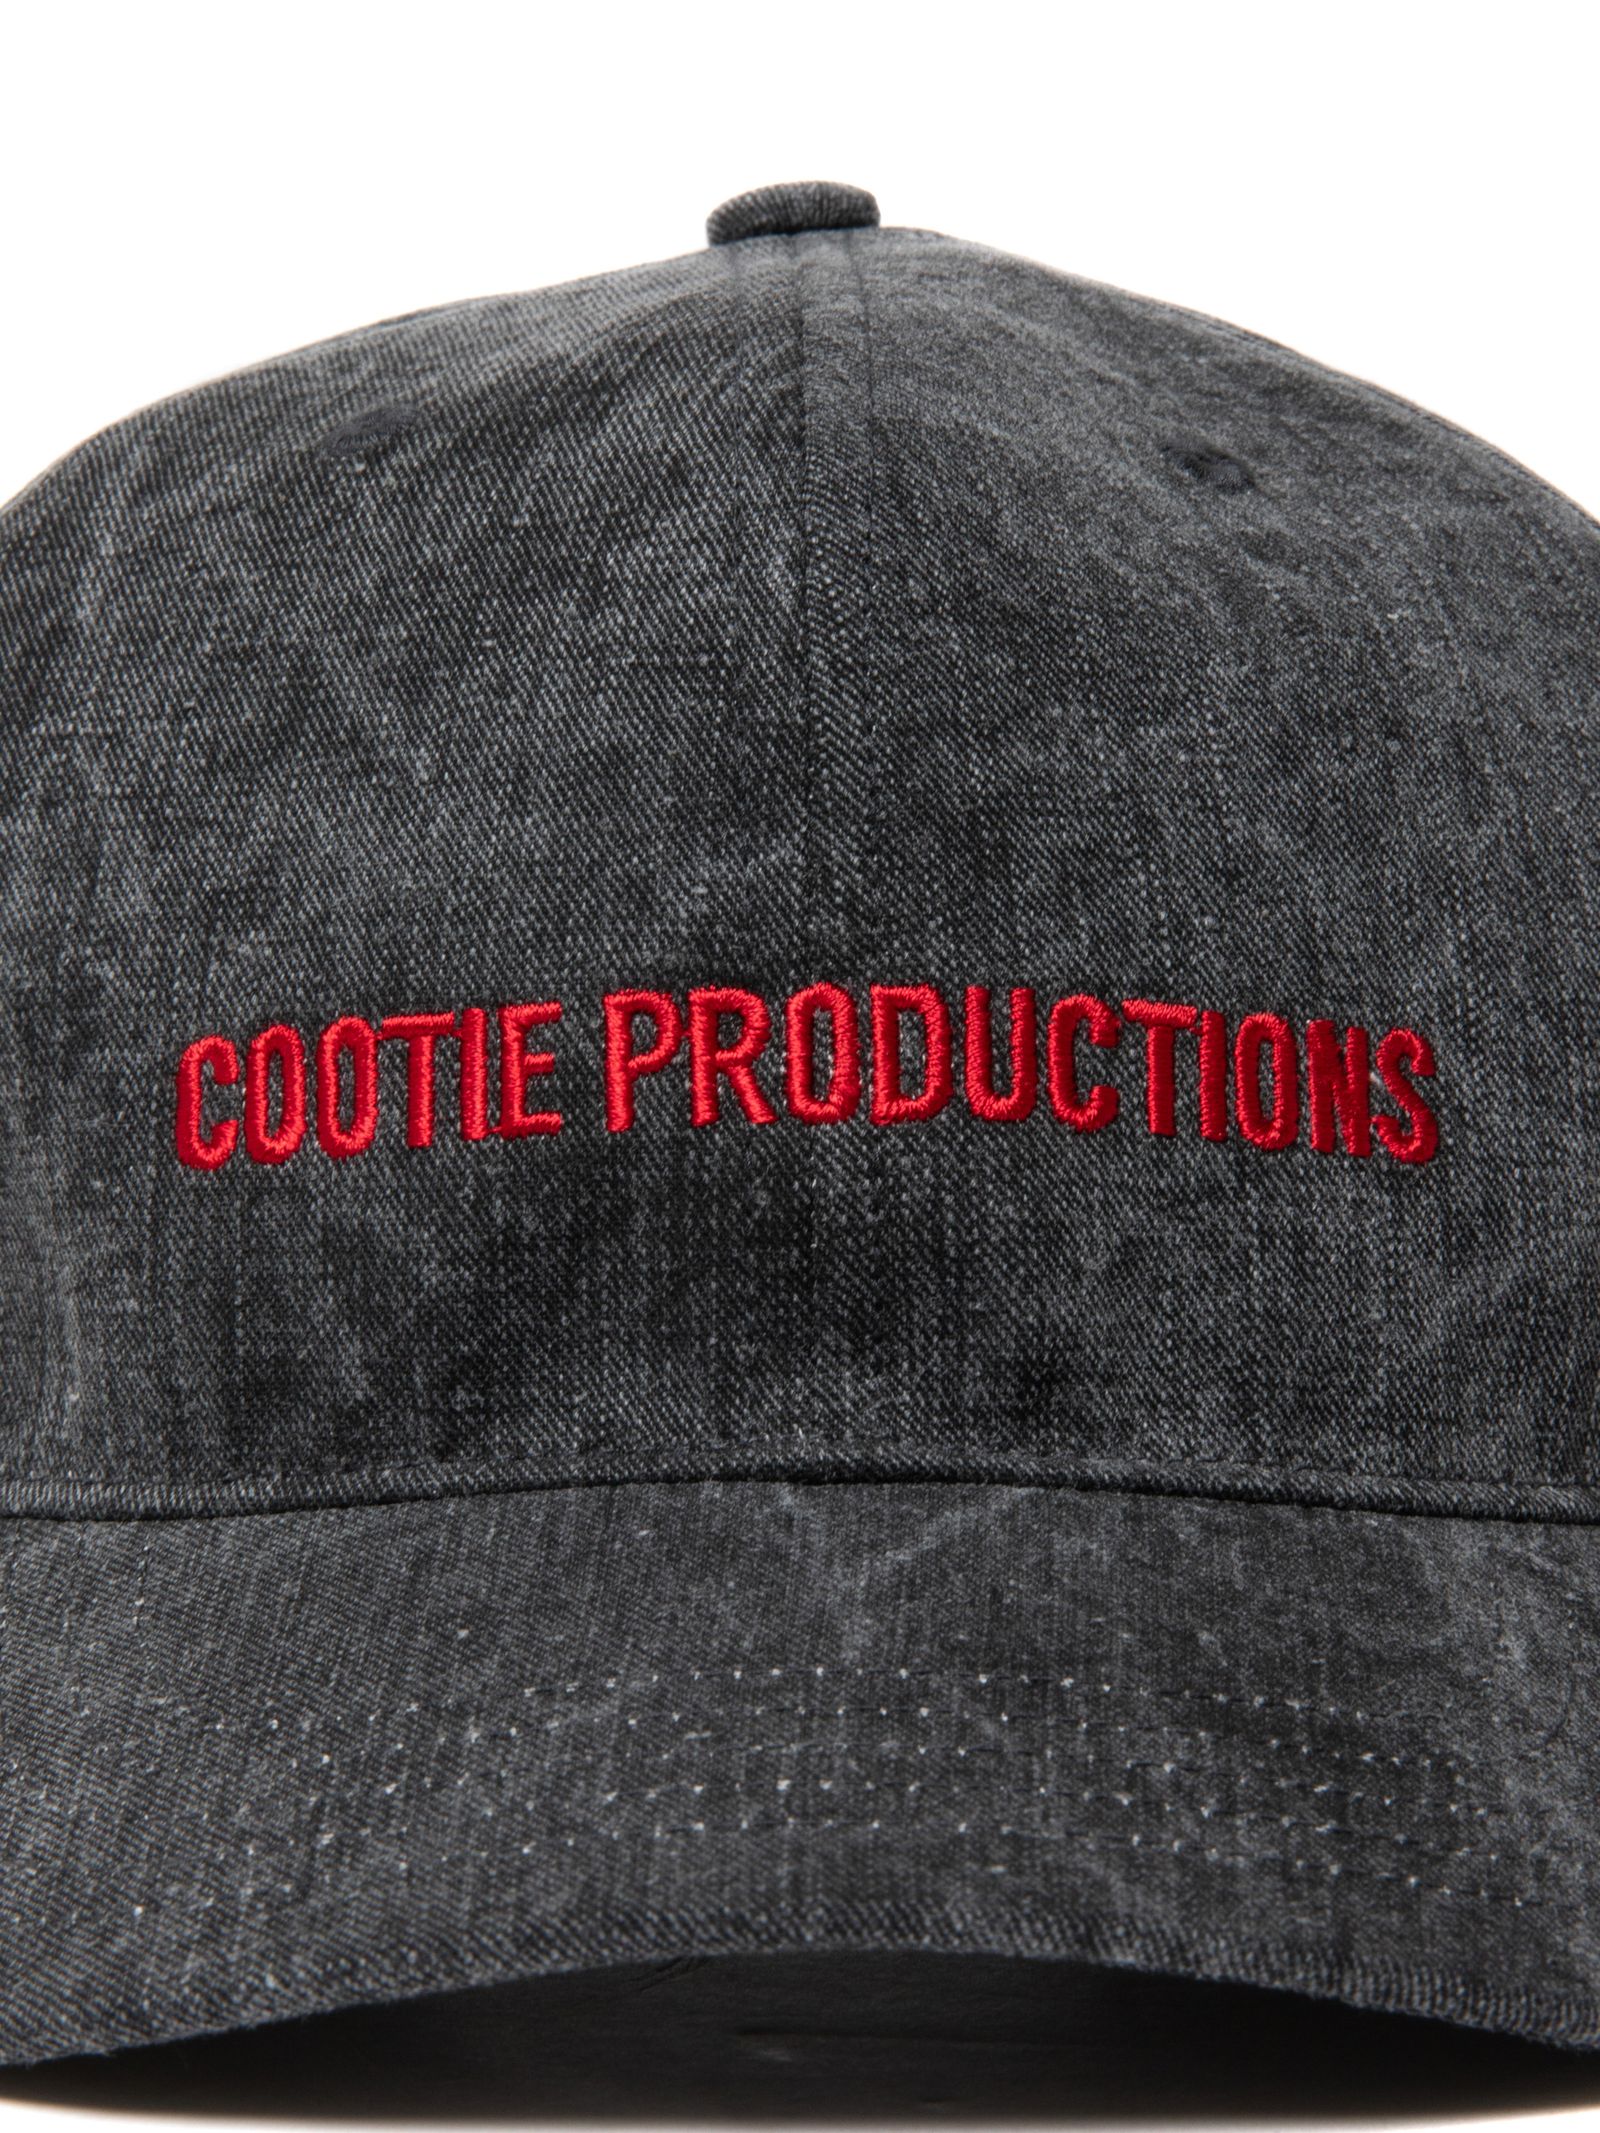 COOTIE PRODUCTIONS - Pigment Coating Twill 6 Panel Cap (BLACK×RED 